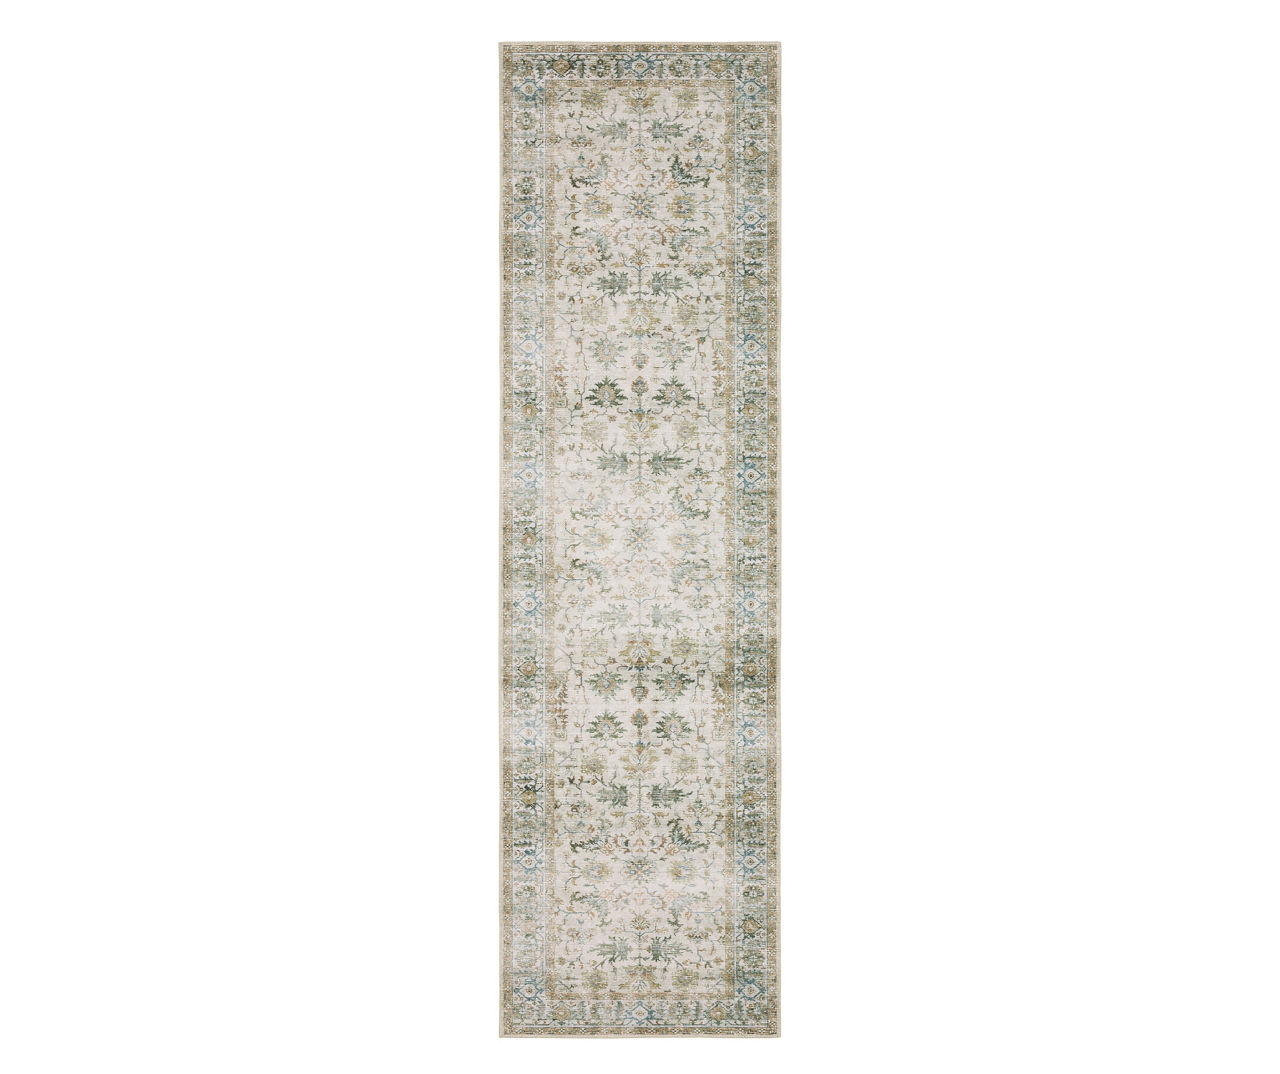 Chalkley Ivory & Green Floral Area Rug, (2' x 8')